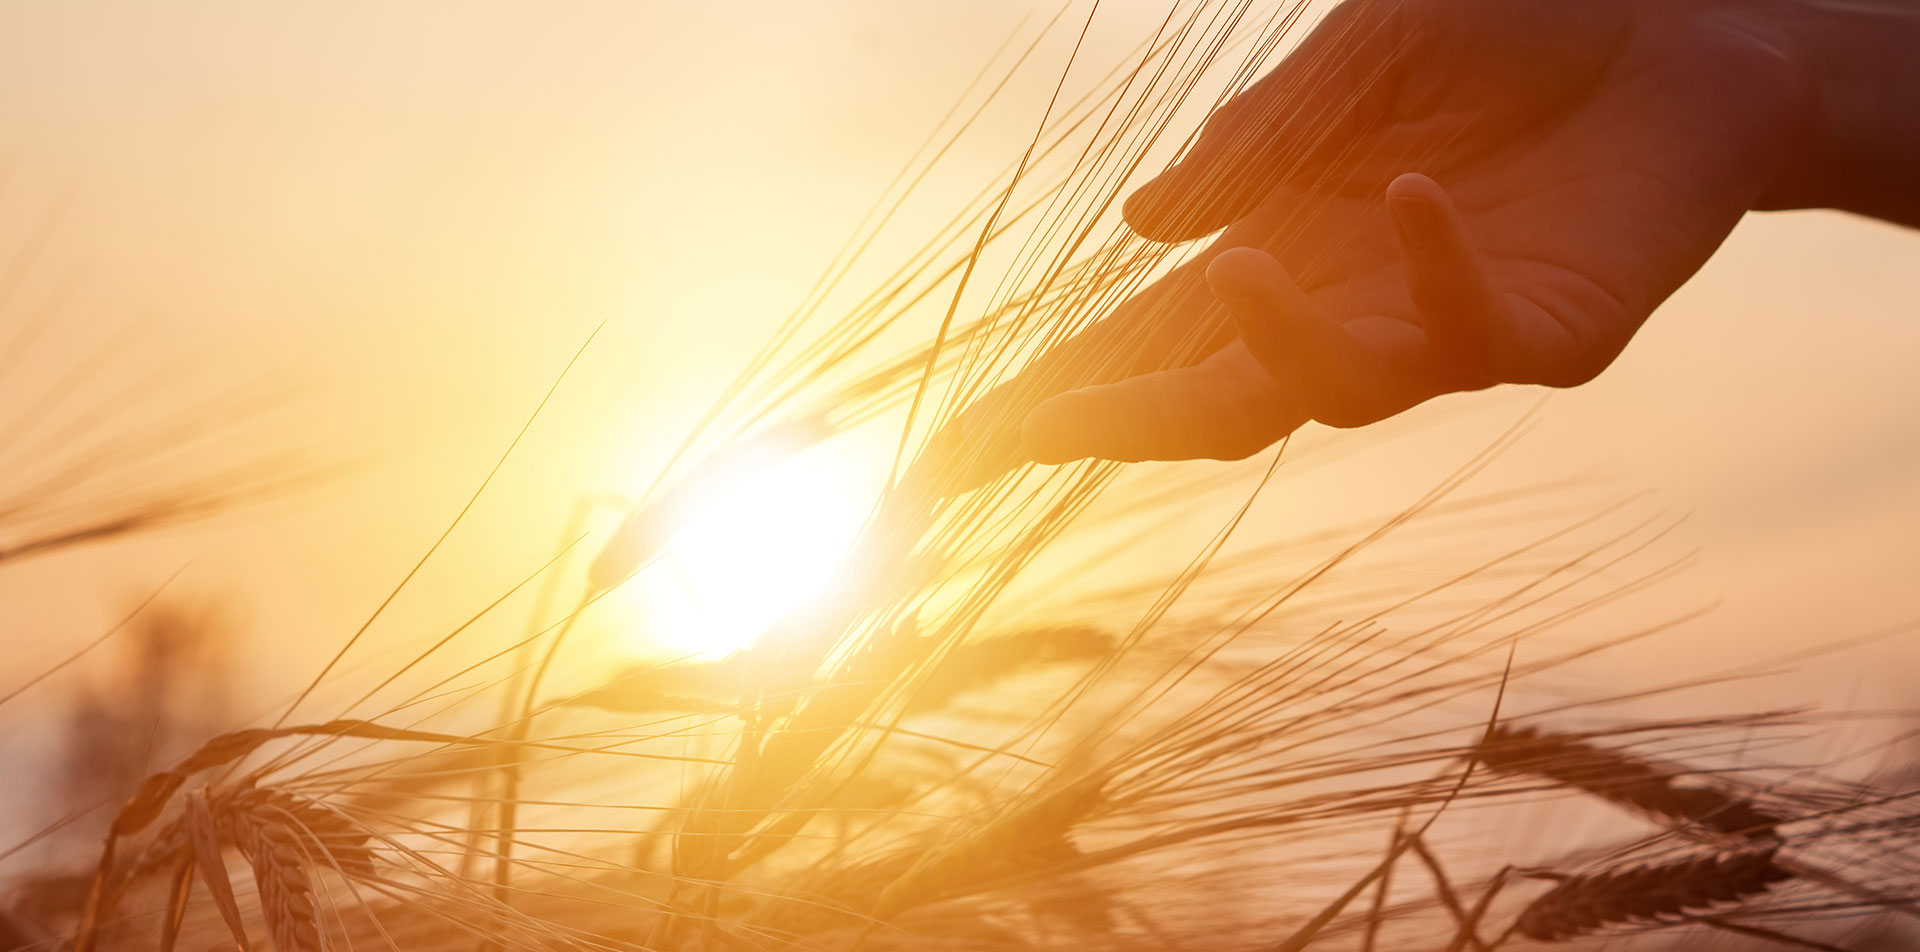 hand touching some wheat on a sunset background